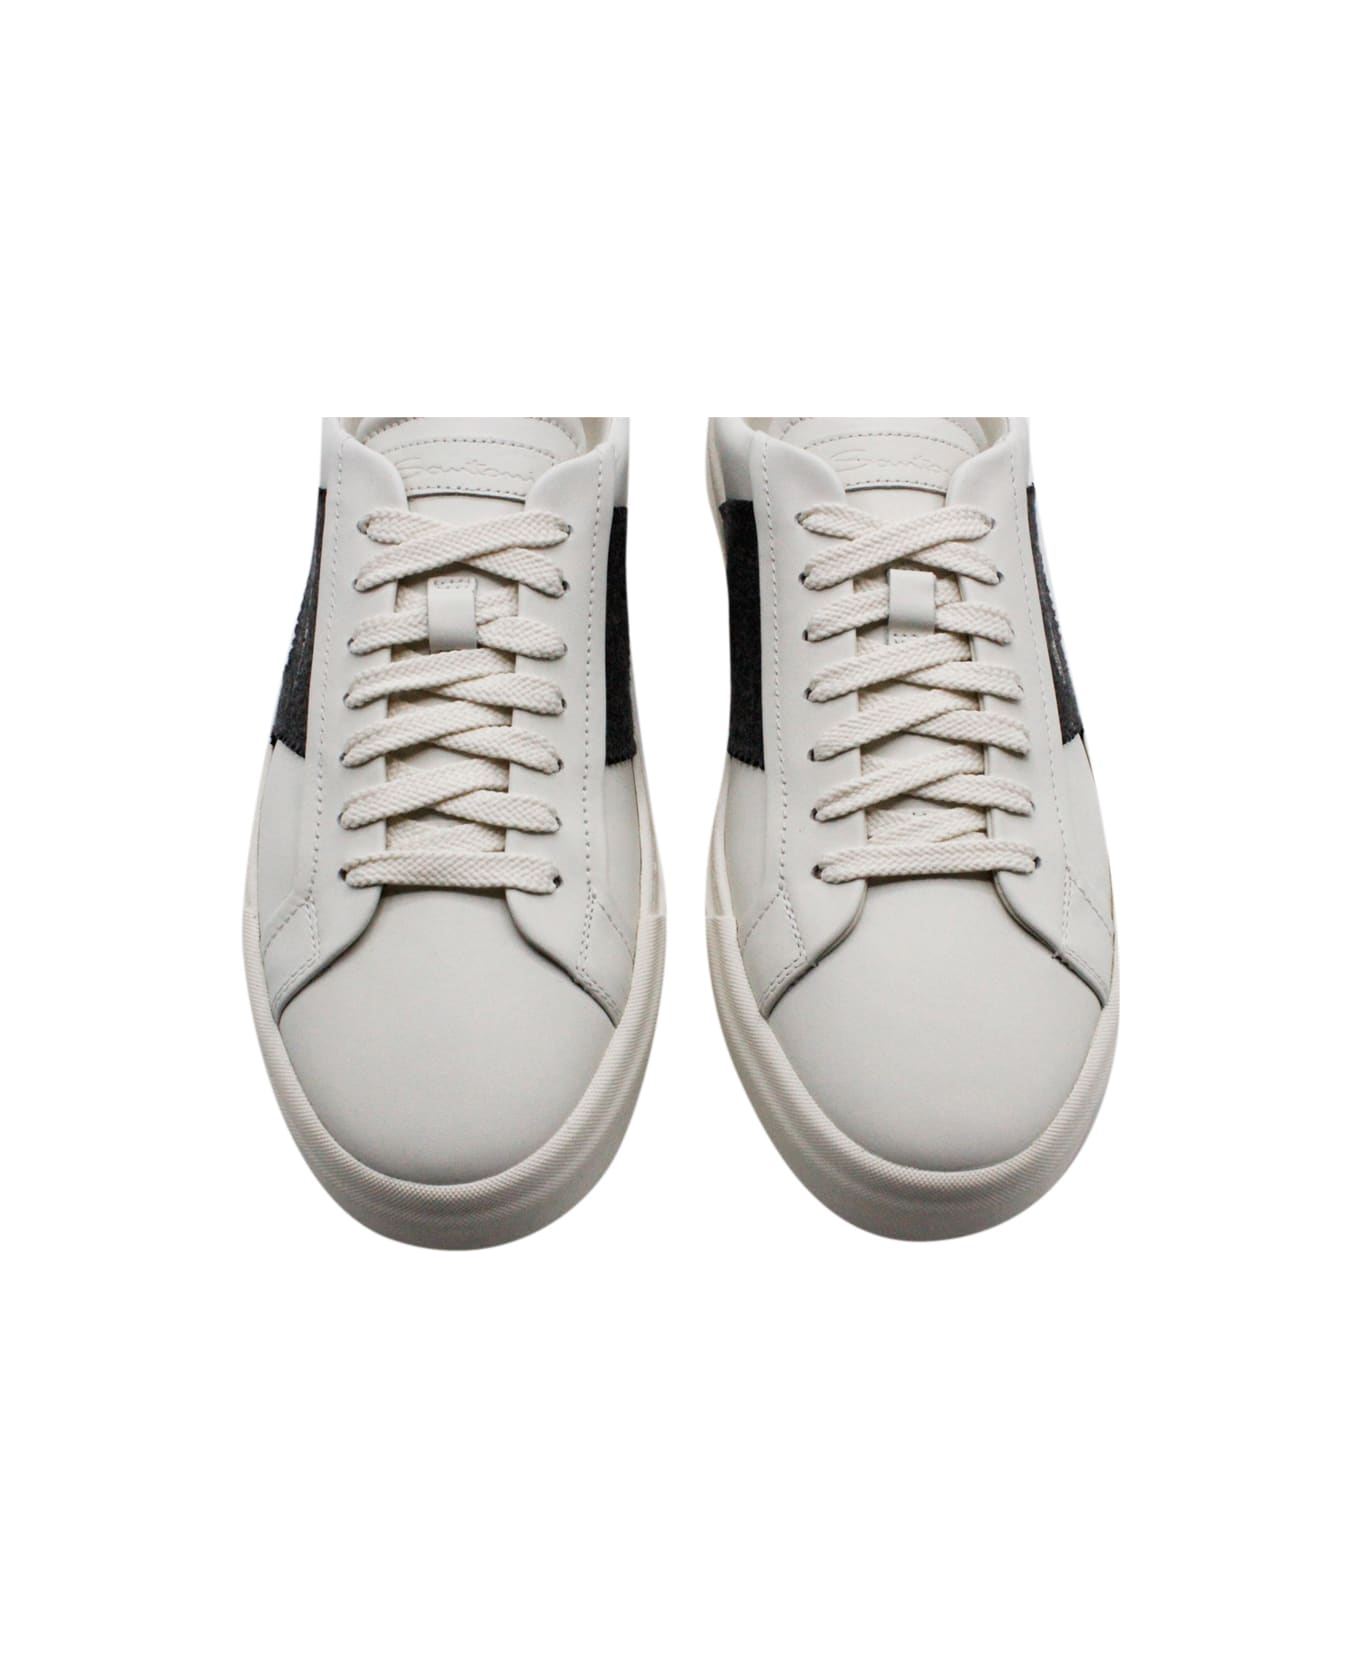 Santoni Sneaker In Soft Calfskin With Side And Back Inserts In Contrasting Color With Logo Lettering. Closing Laces - White スニーカー